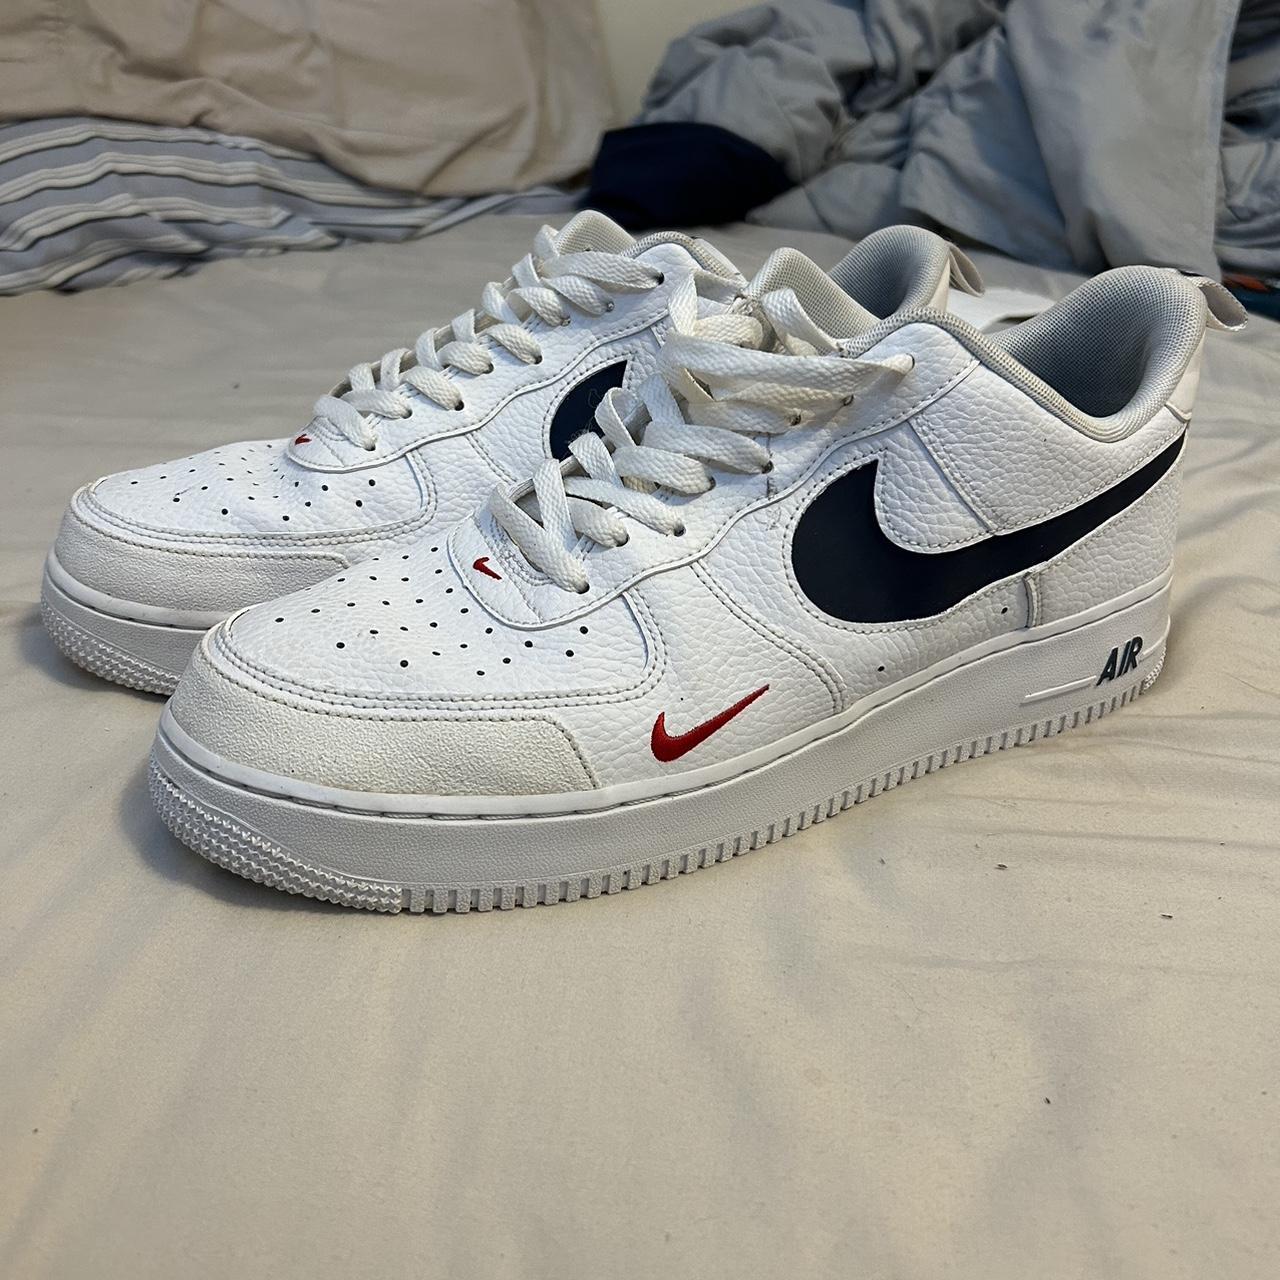 Nike Air Force 1 LV8 Patriots, Size 12 US , Lightly